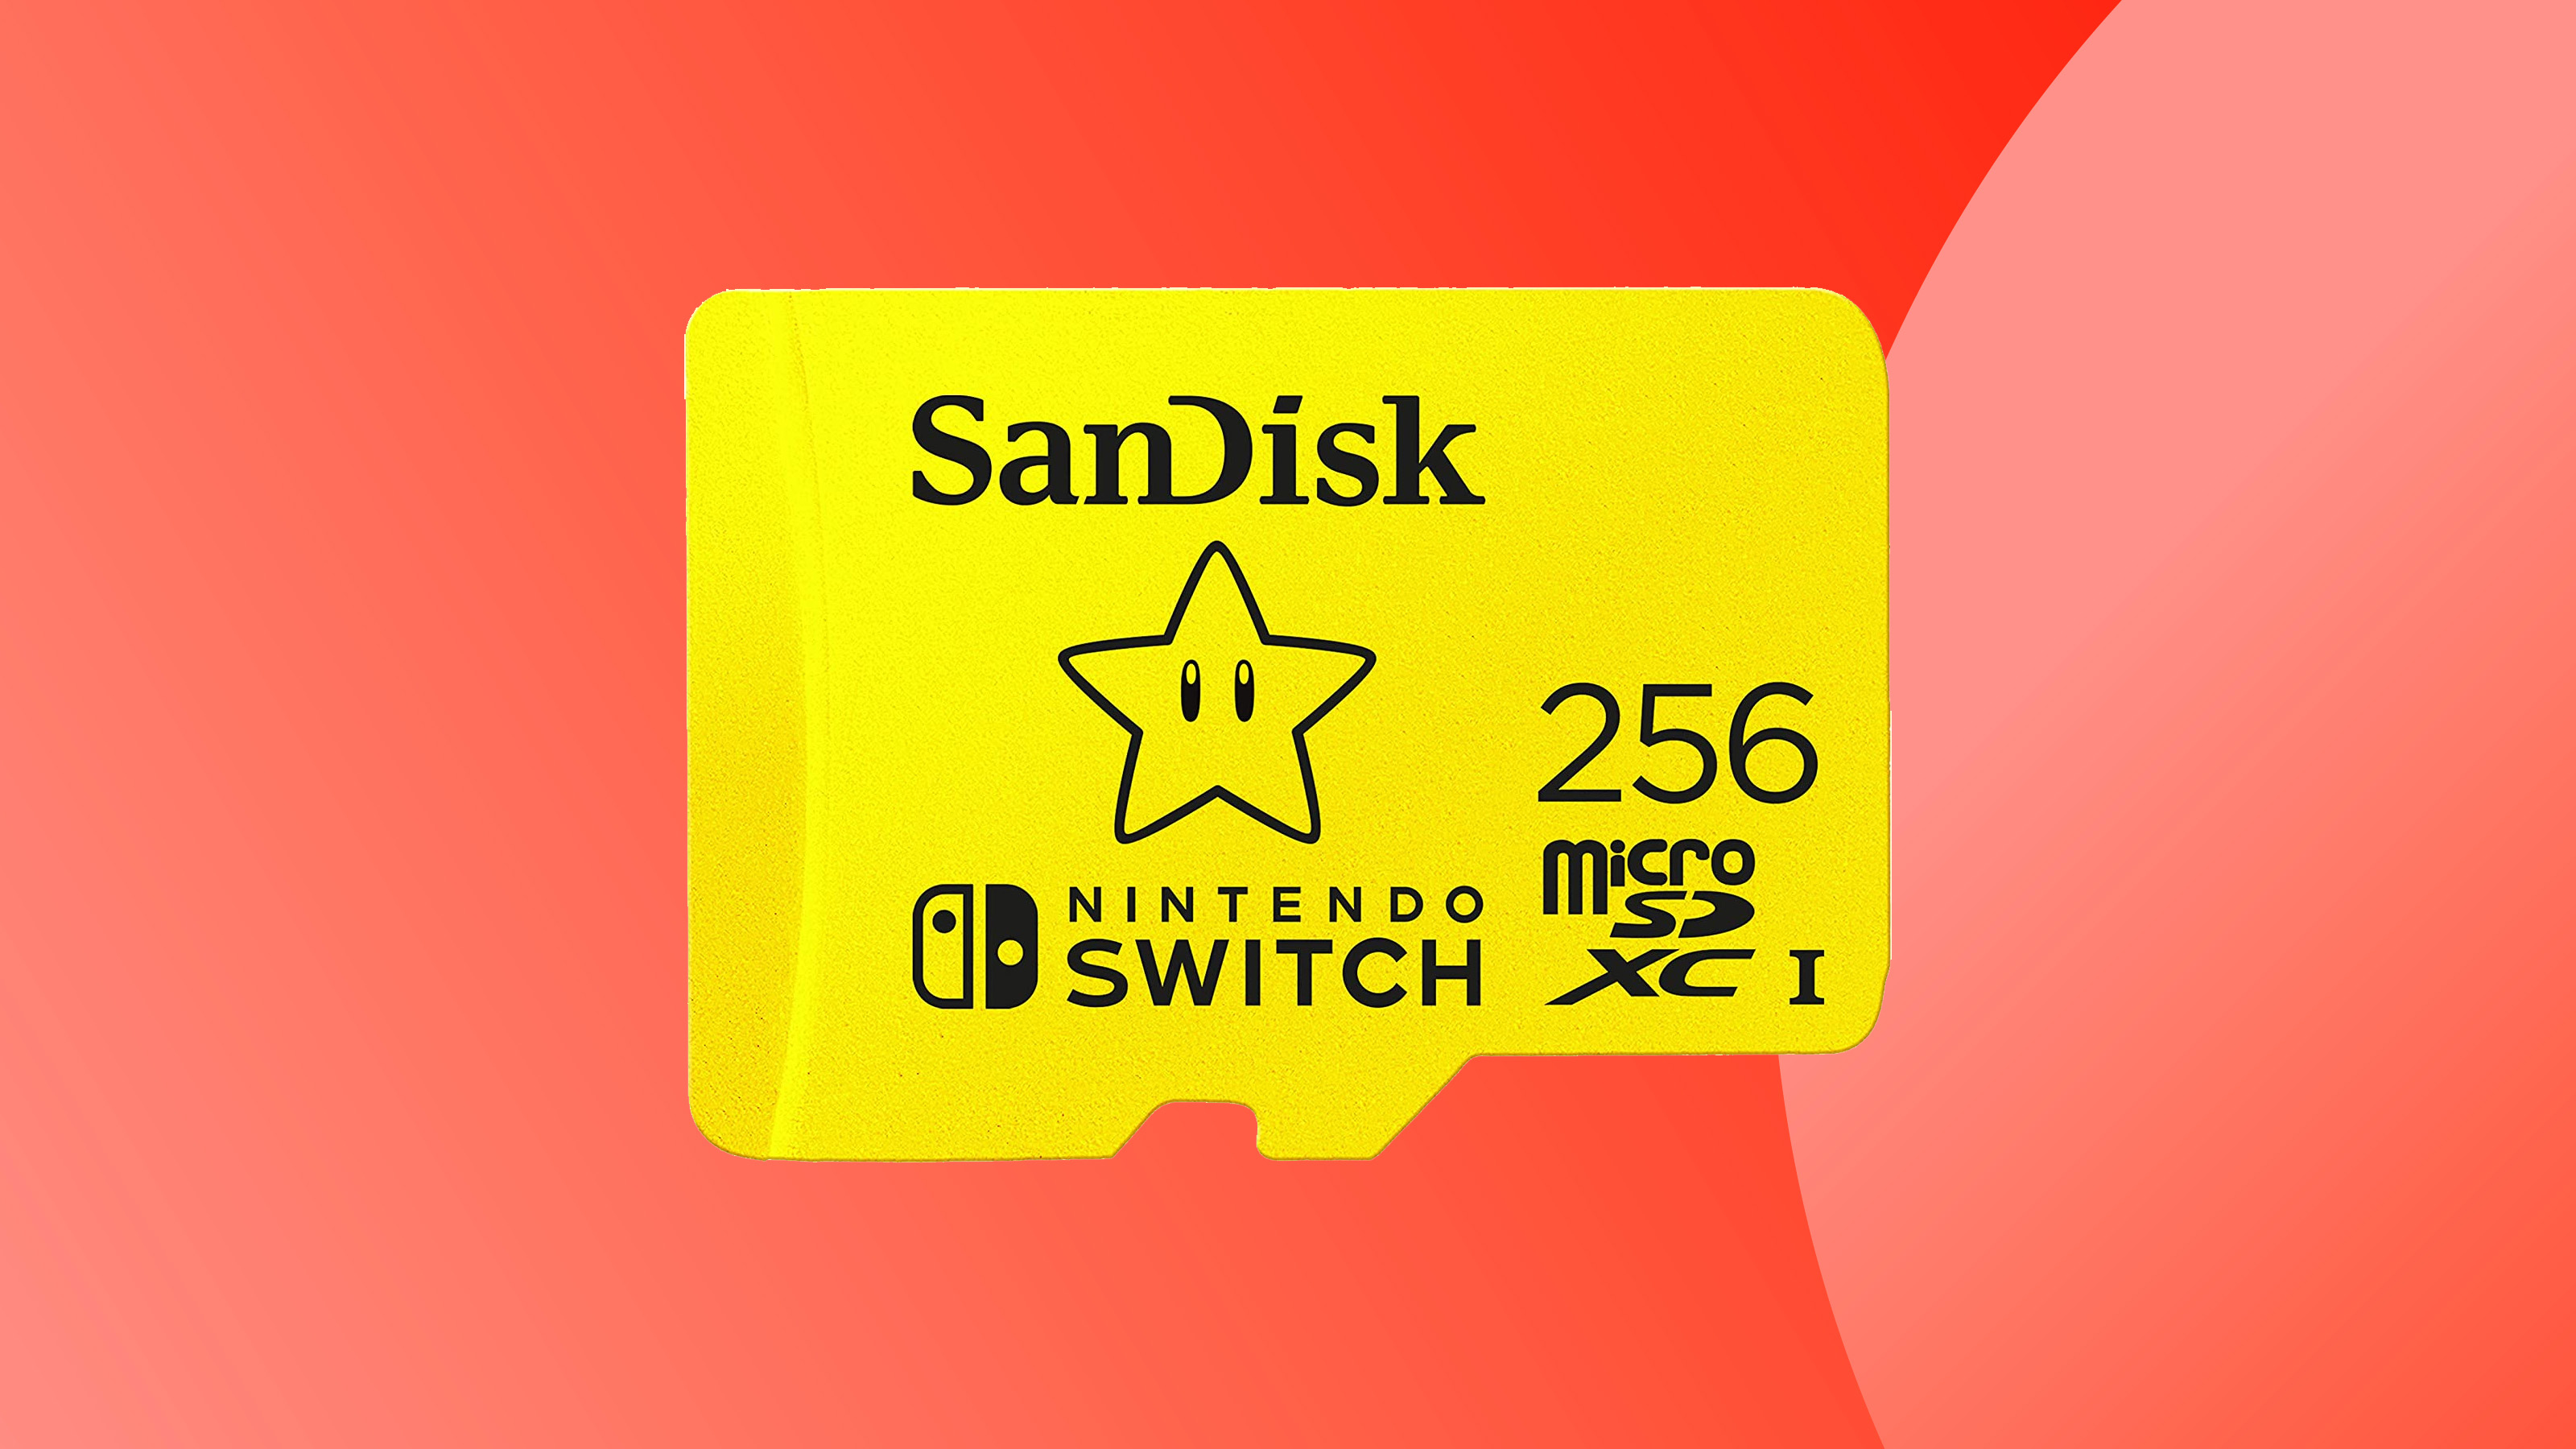 A product shot of the SanDisk Micro SD card on a colorful background